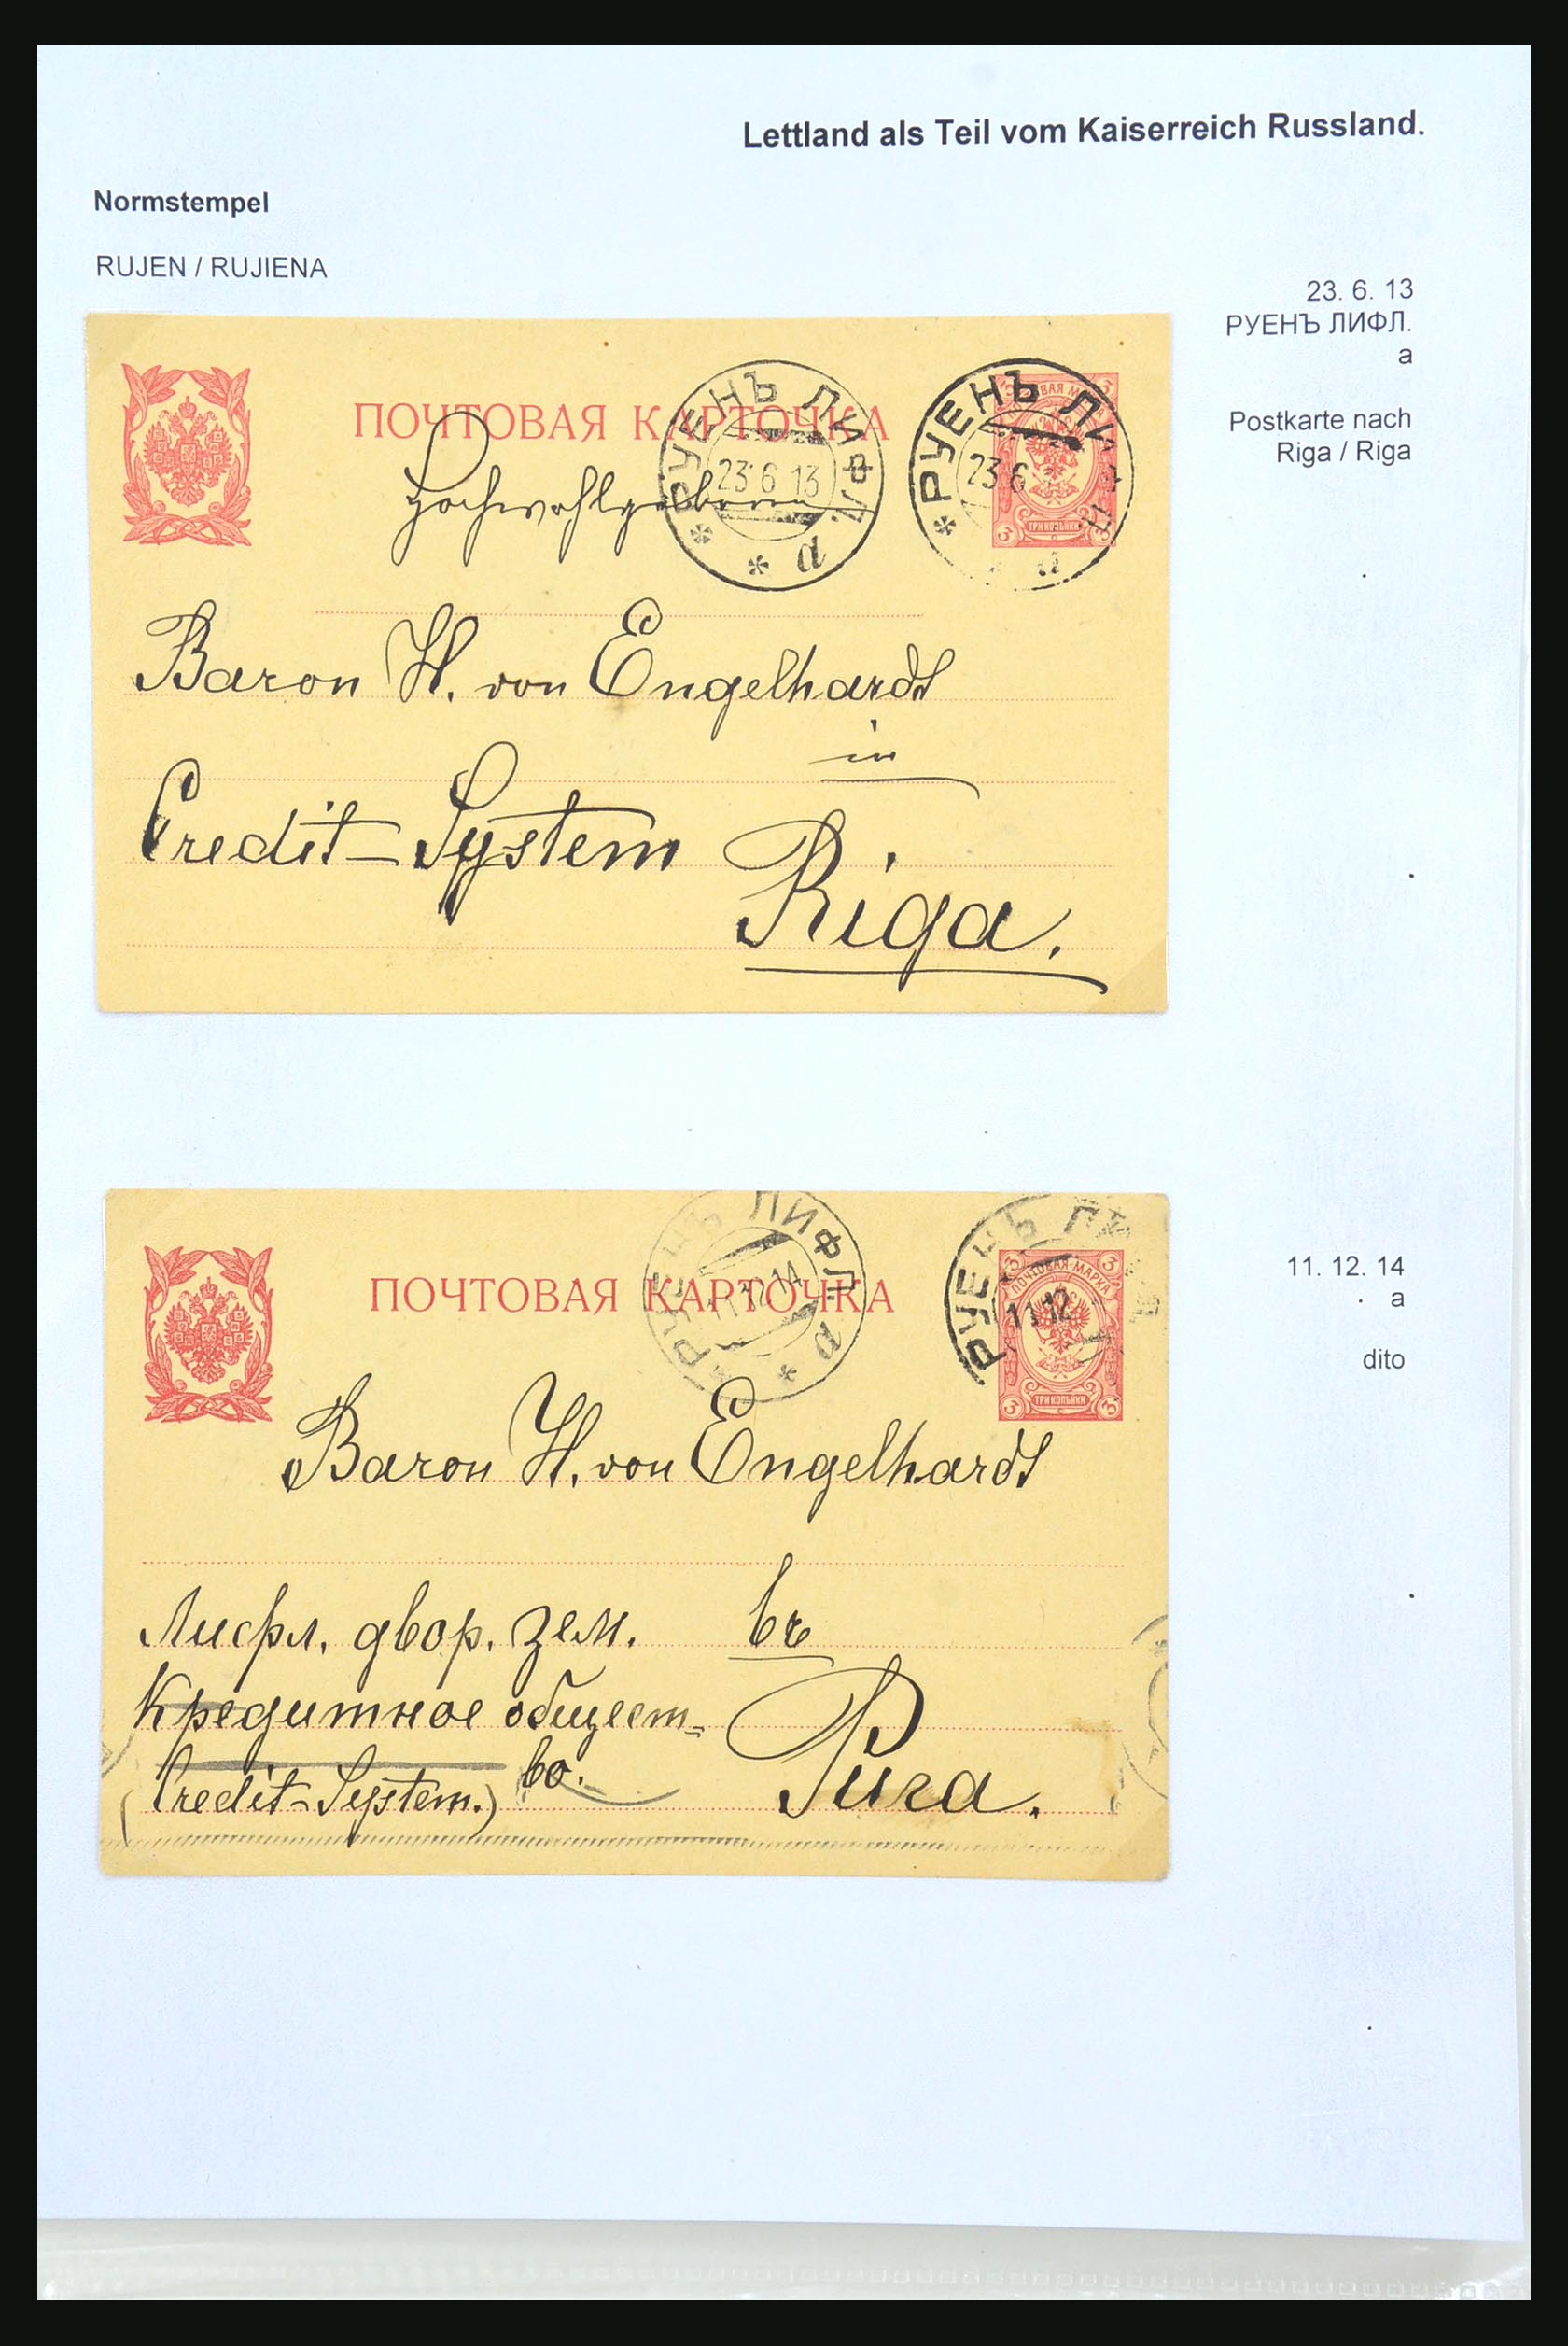 31305 105 - 31305 Latvia as part of Russia 1817-1918.